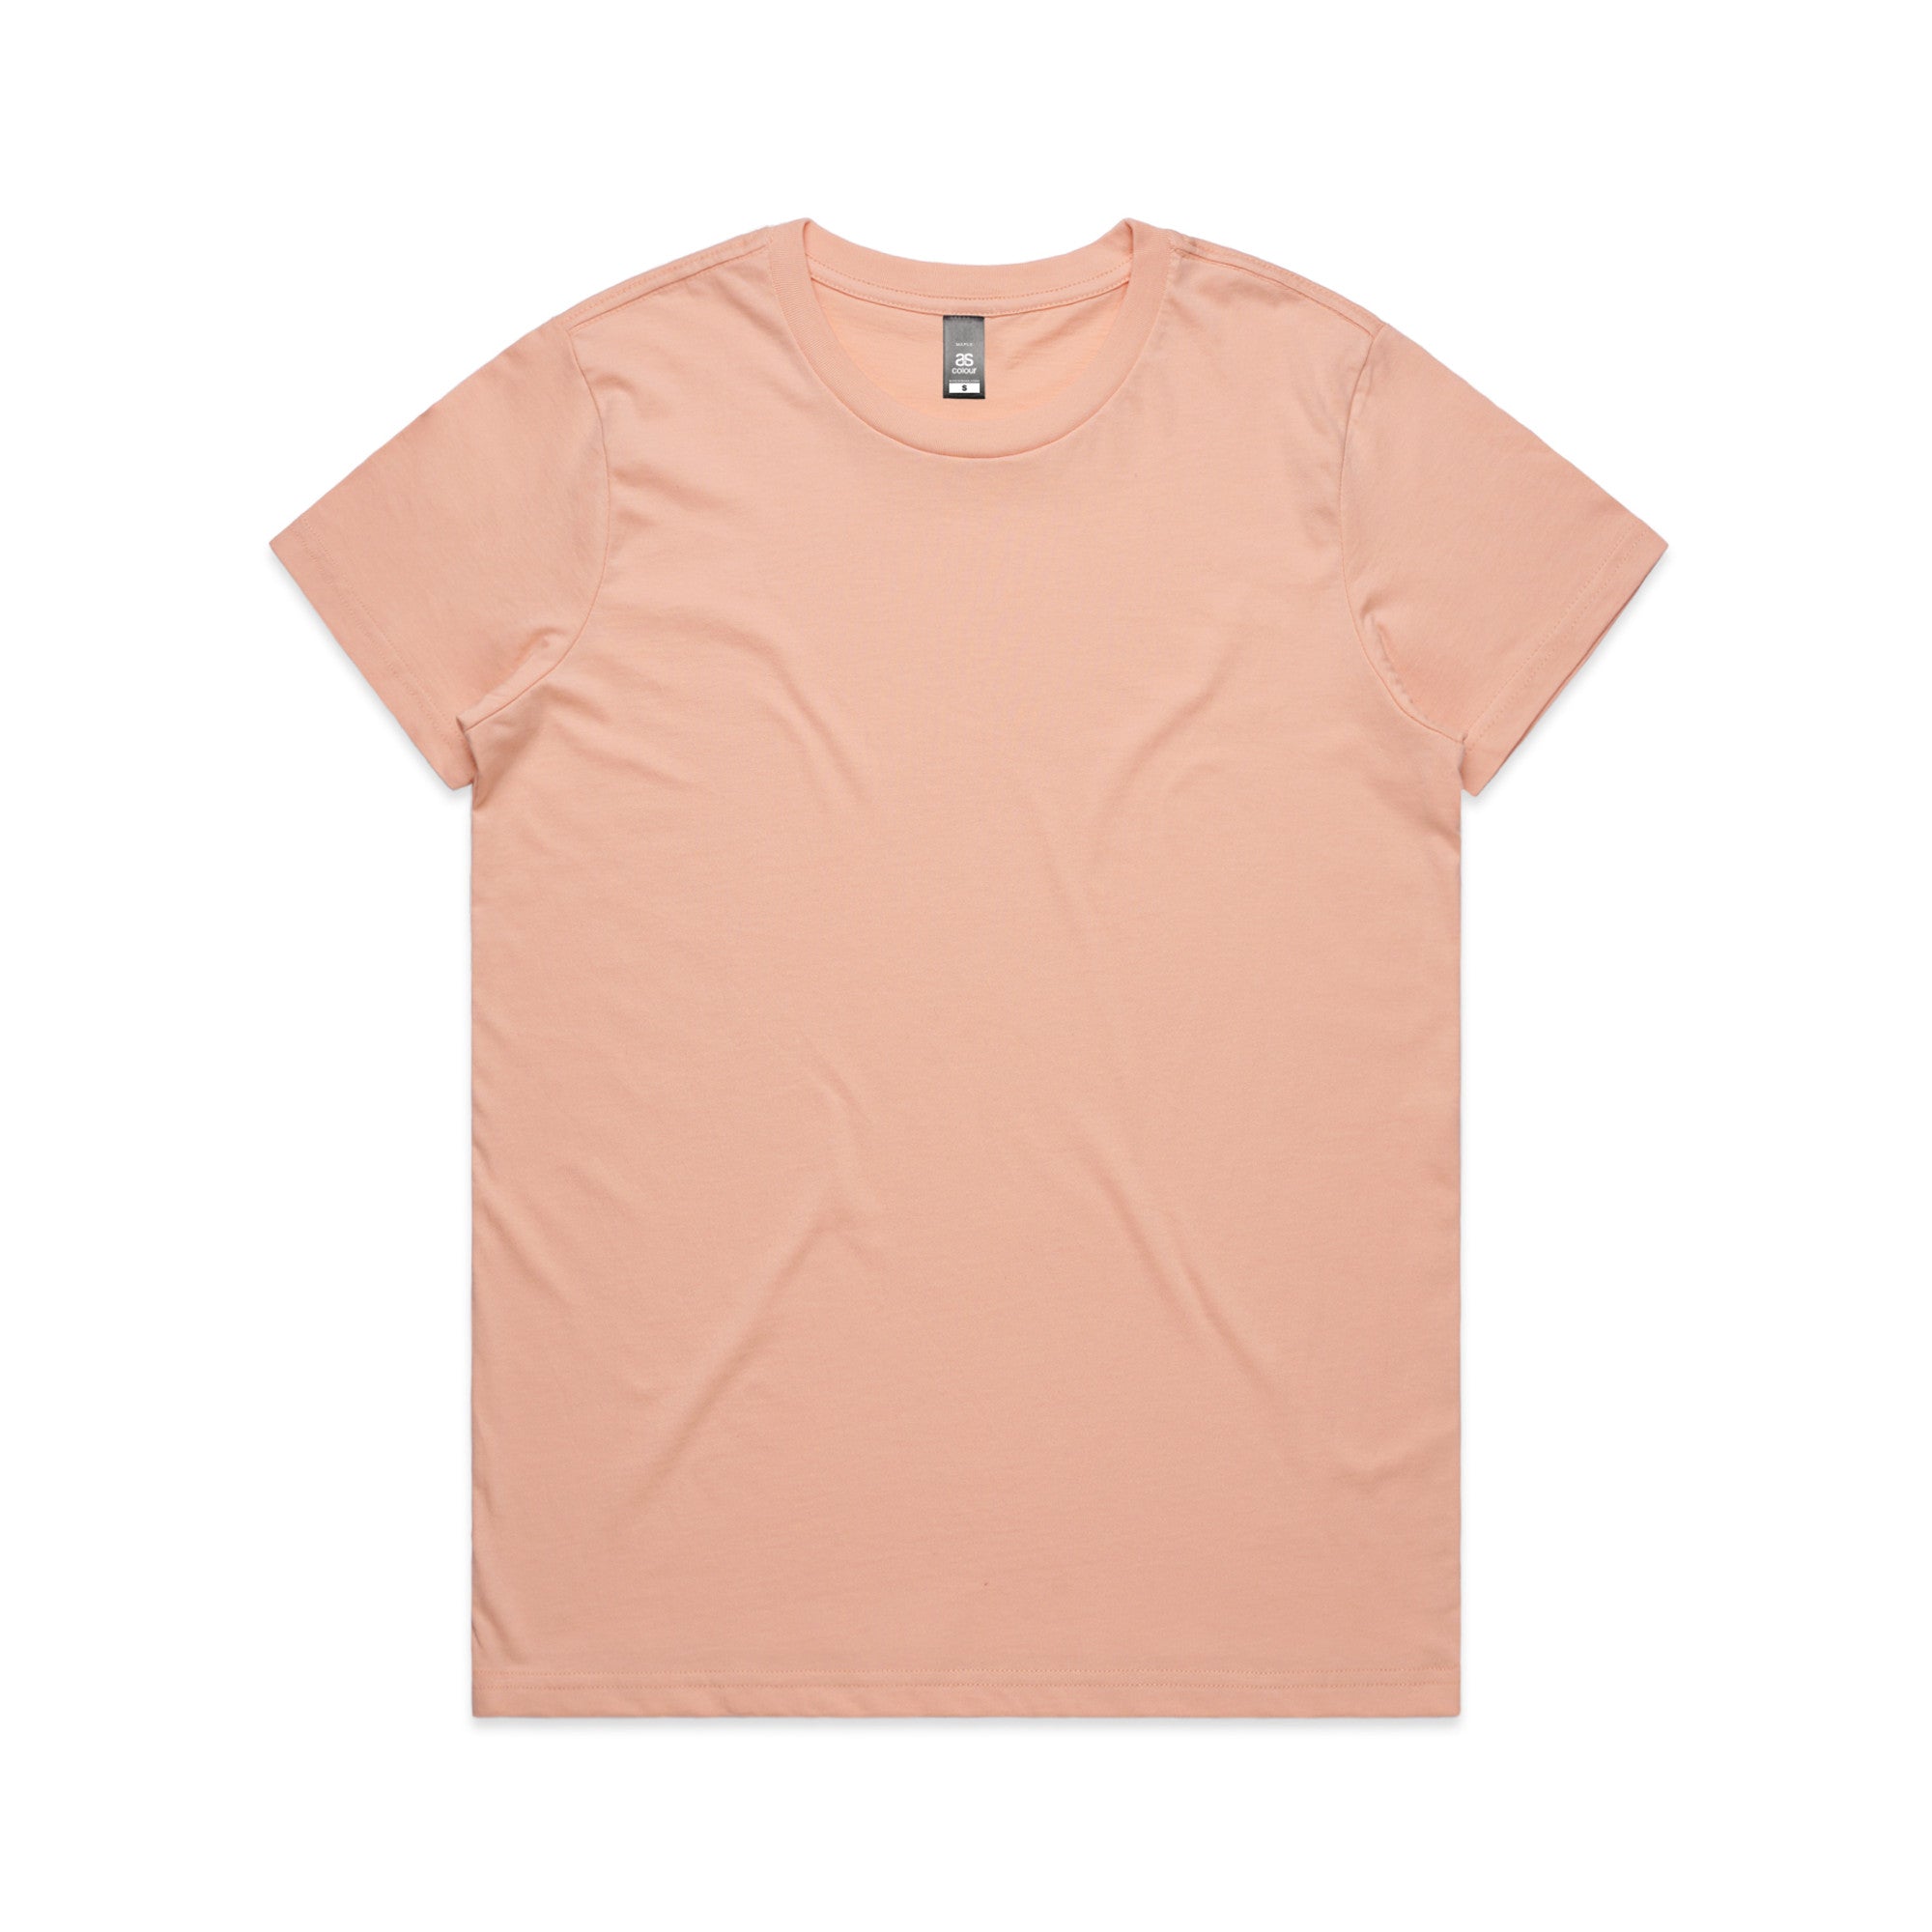 AS Colour Womens Maple Tee 4001 Size L